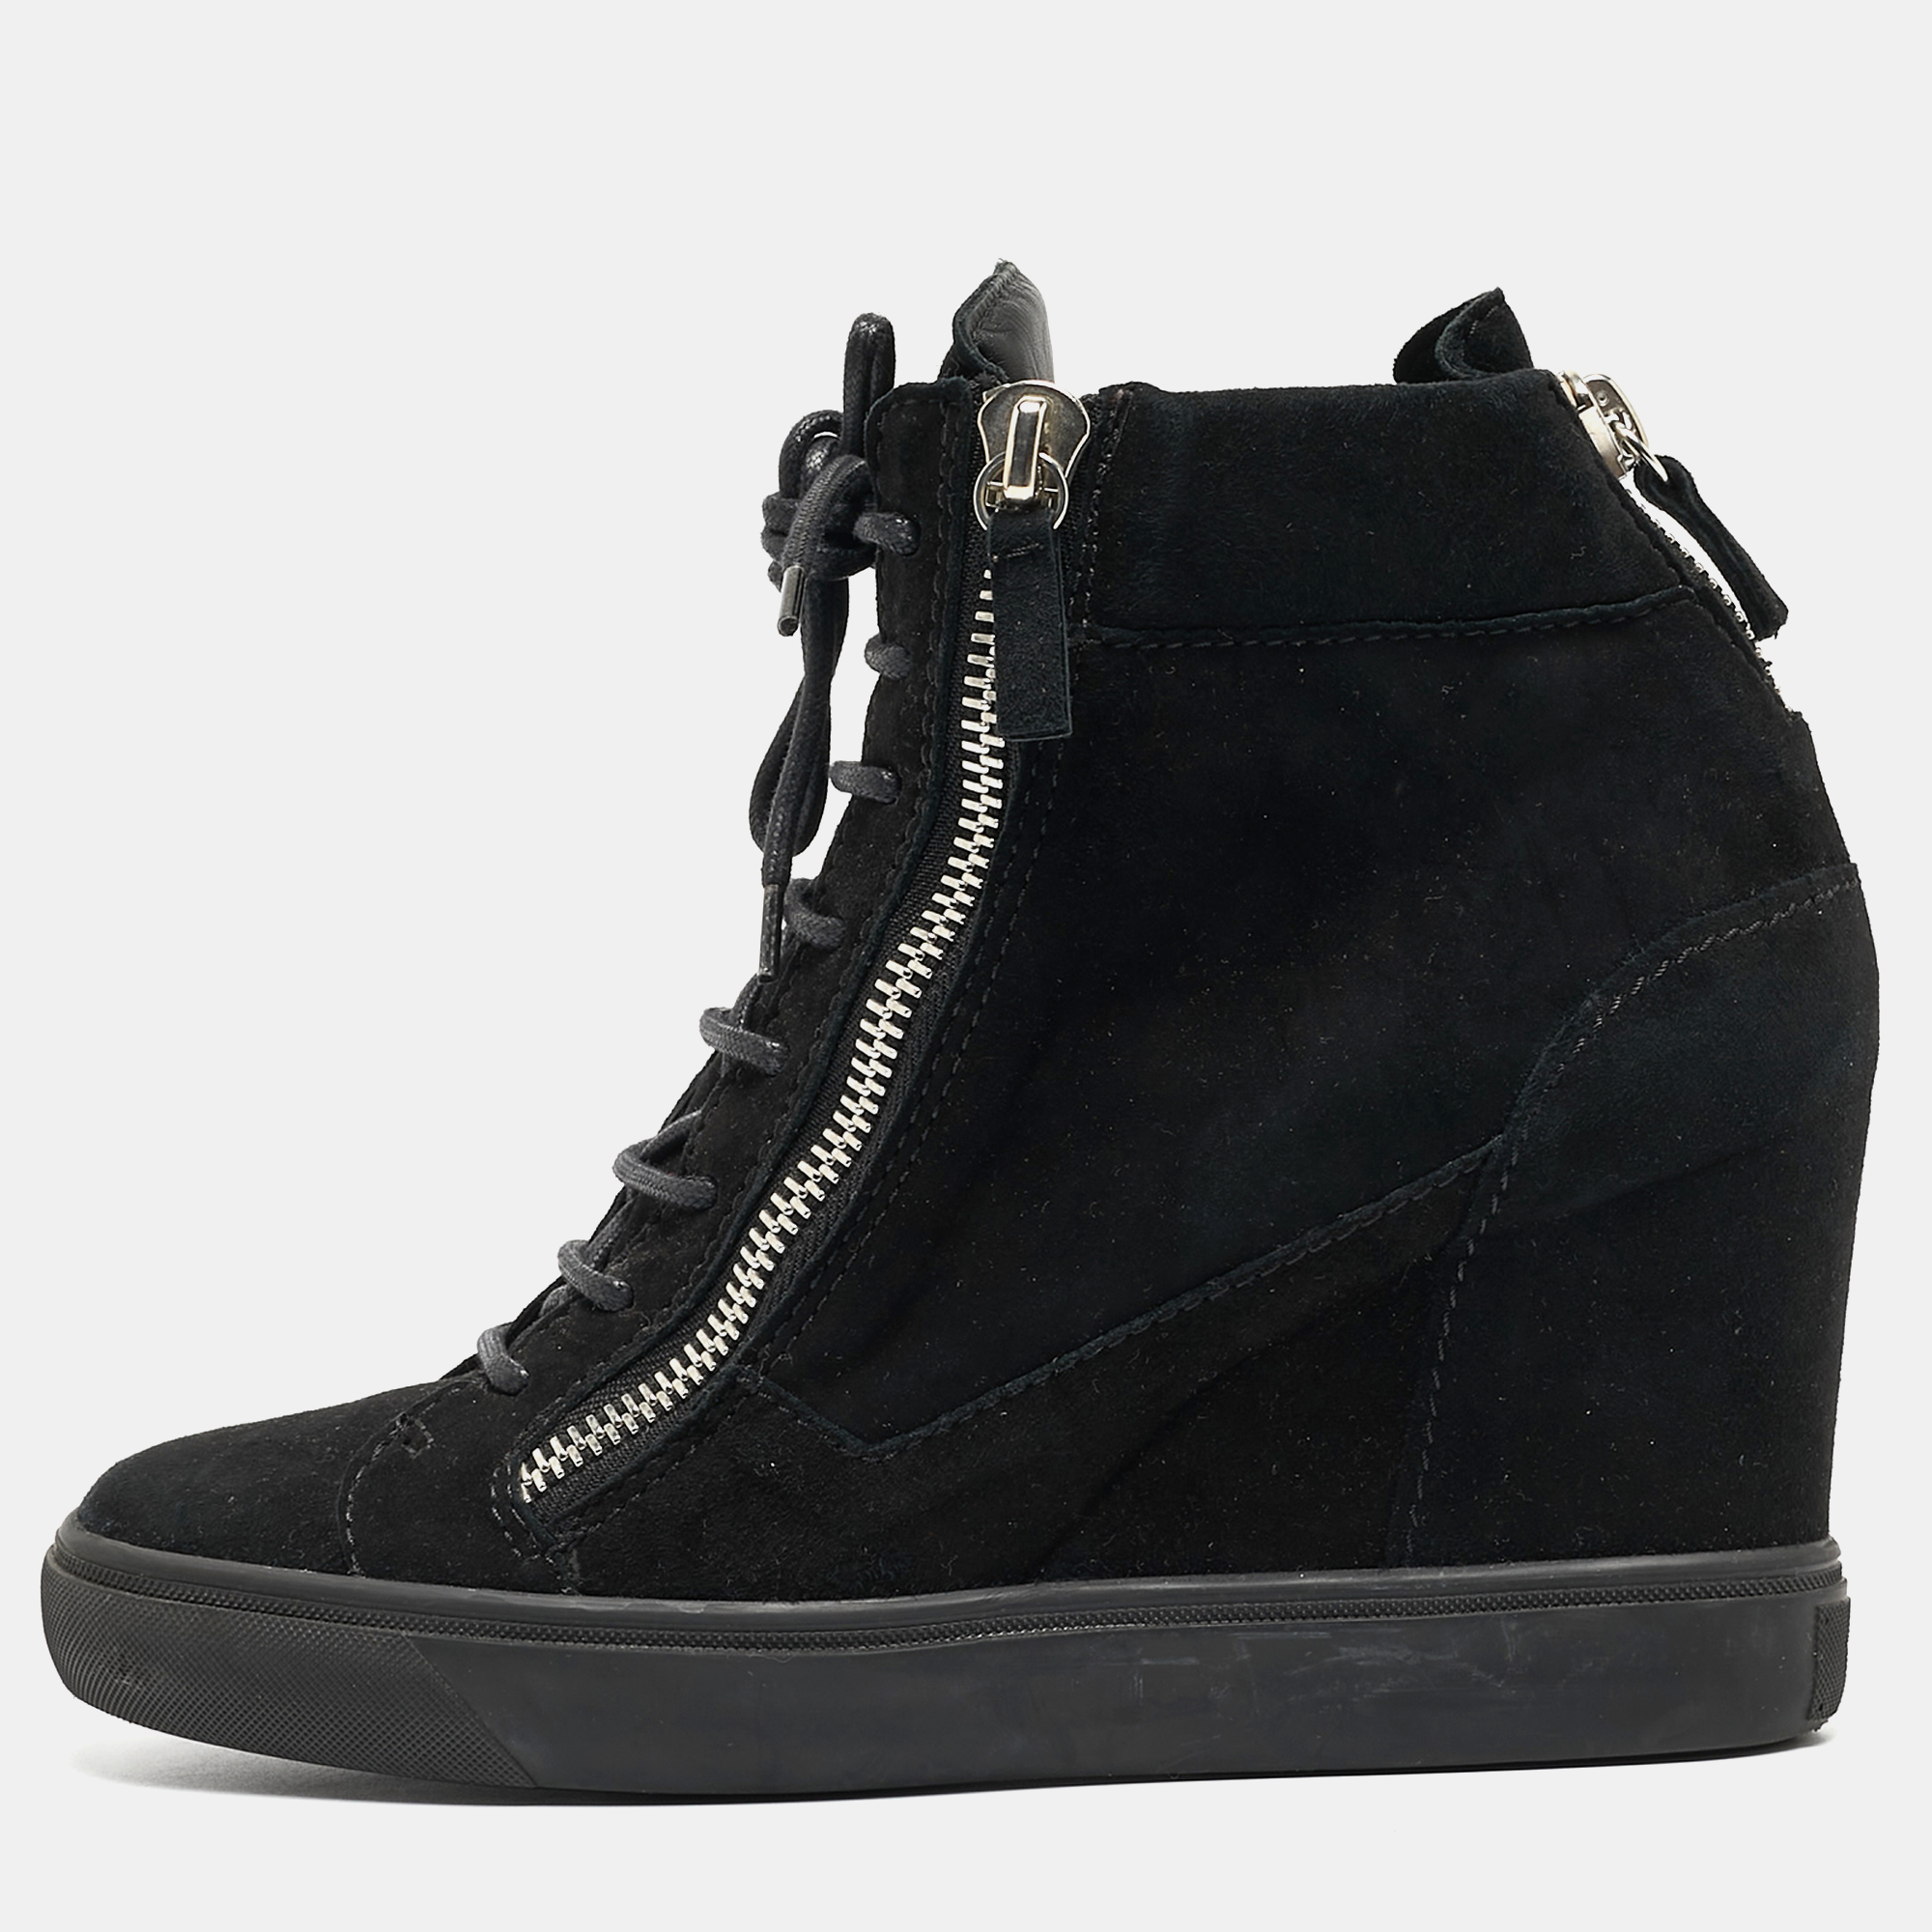 Giuseppe Zanotti Black Suede High Top Wedge Sneakers Size 40